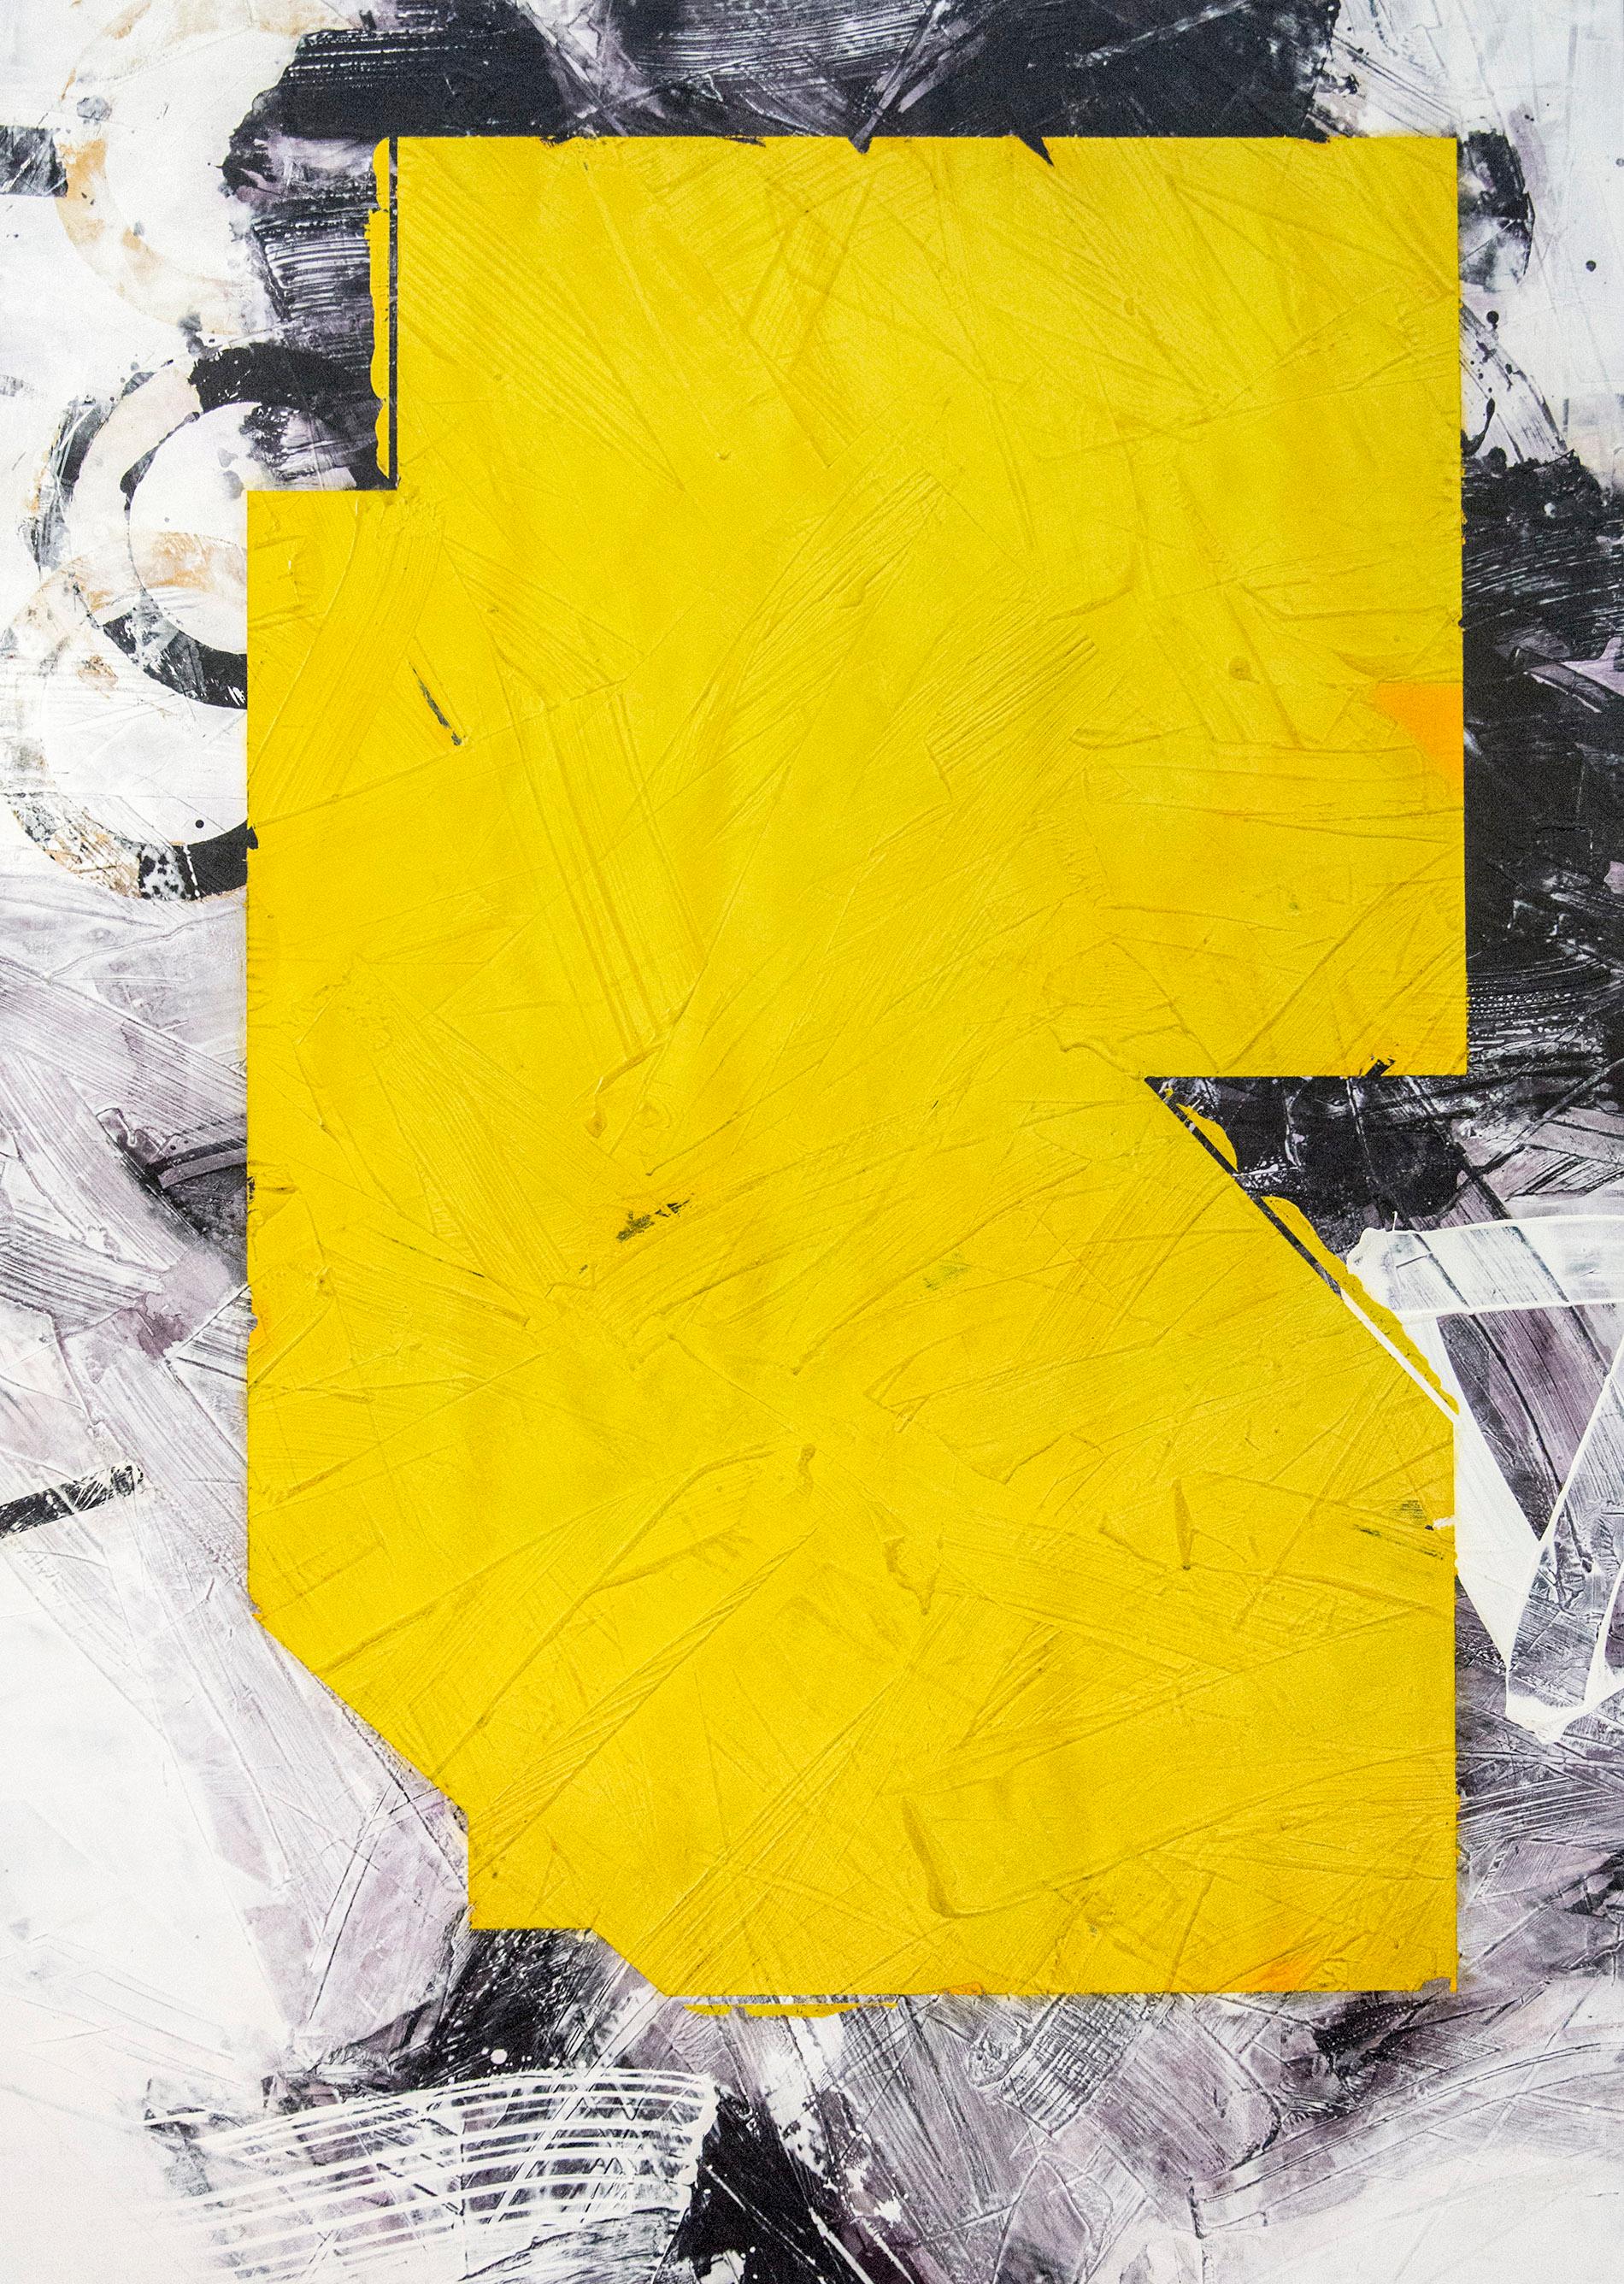 Yellow No 27 - large, bold abstract shapes, marble dust, acrylic, wax, on canvas - Painting by Ivo Stoyanov